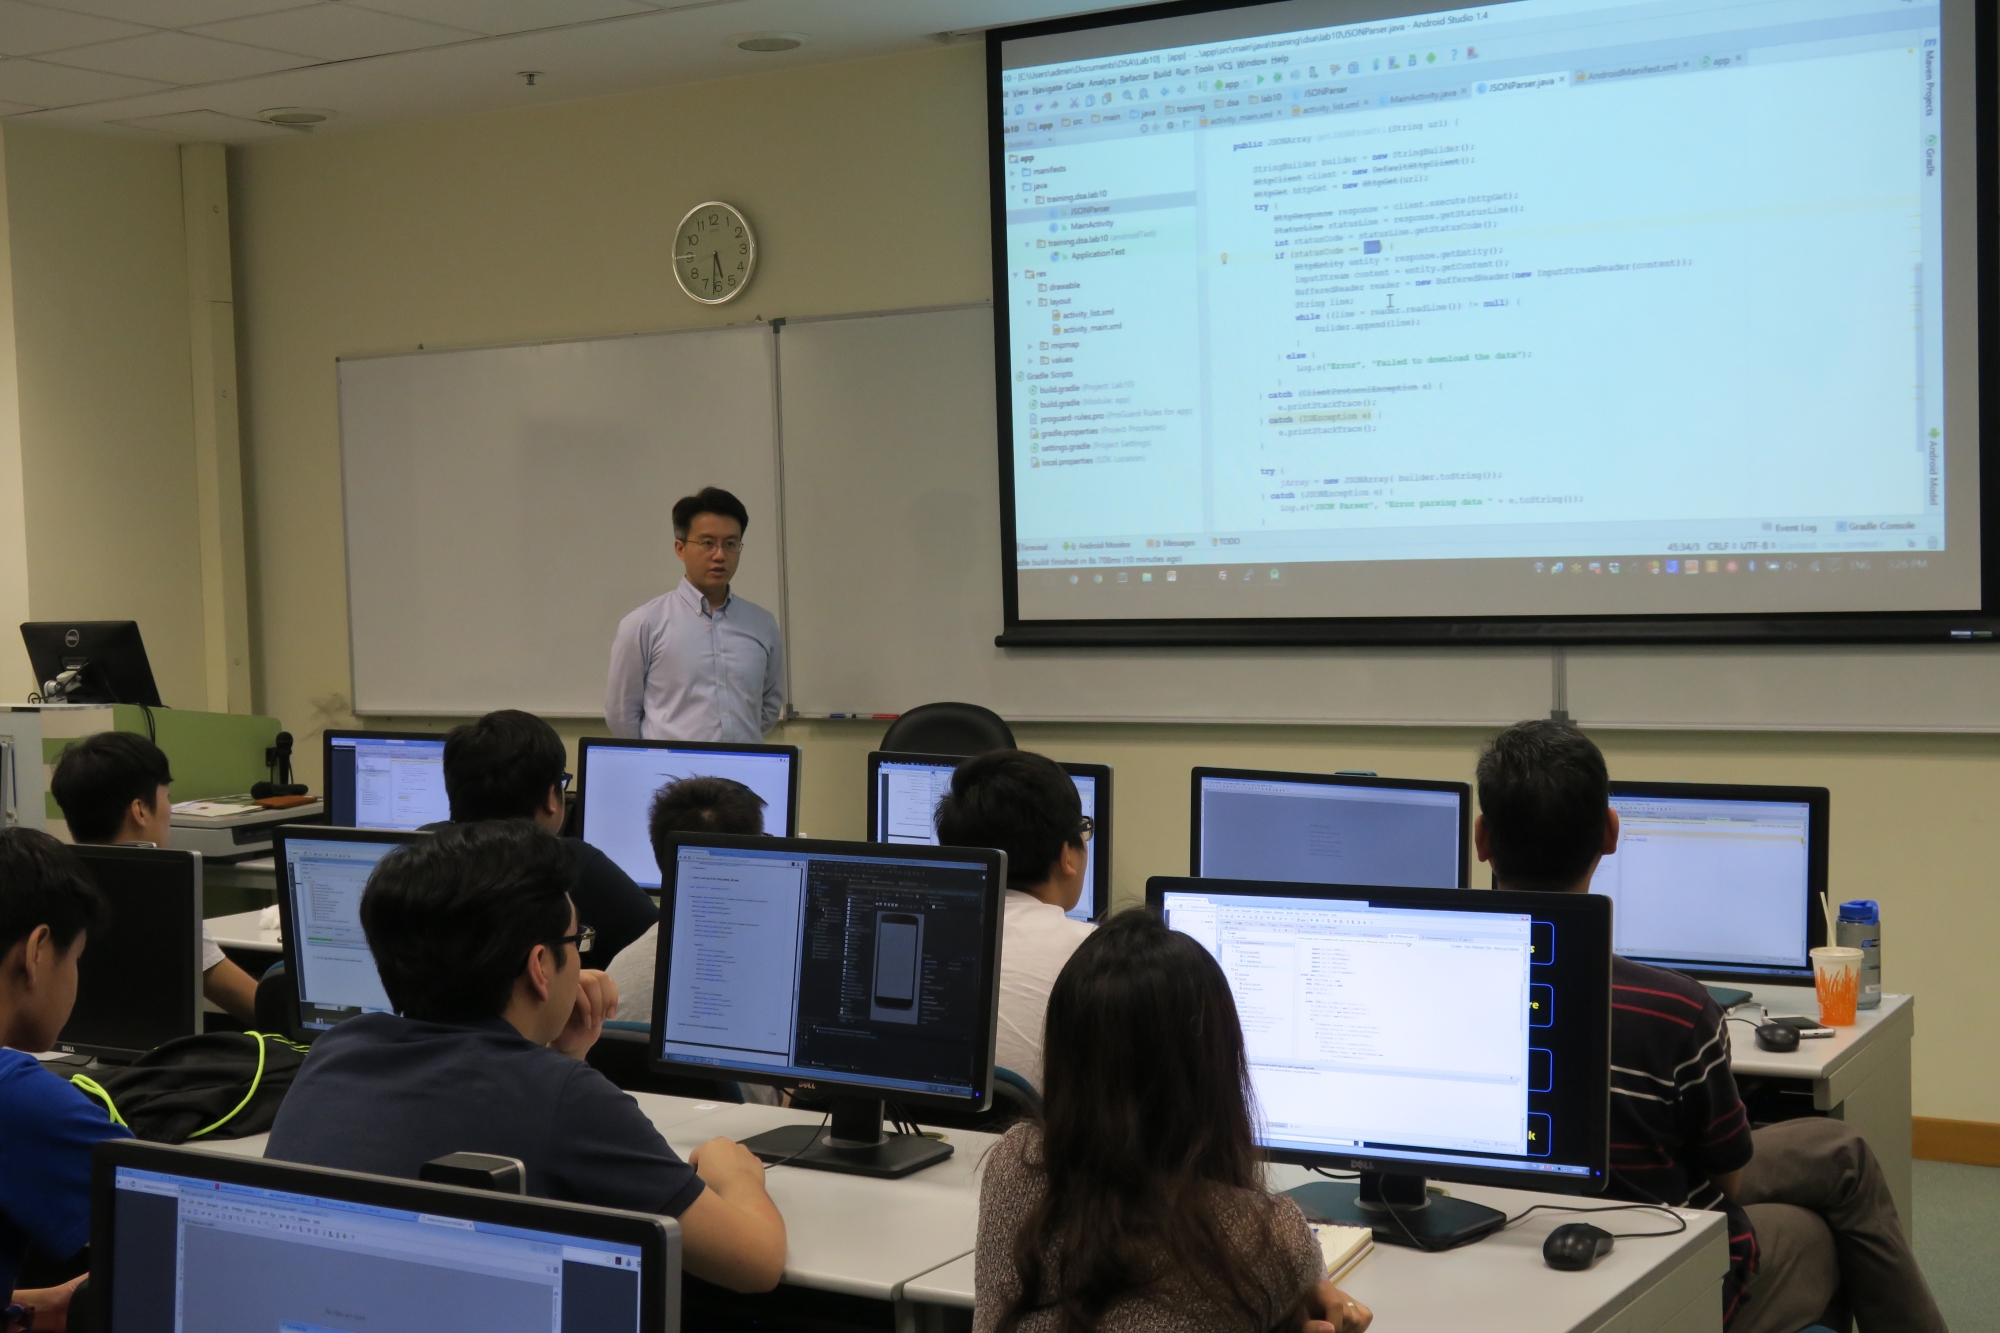 Mr. Yeung demonstrated the process of mobile app development.